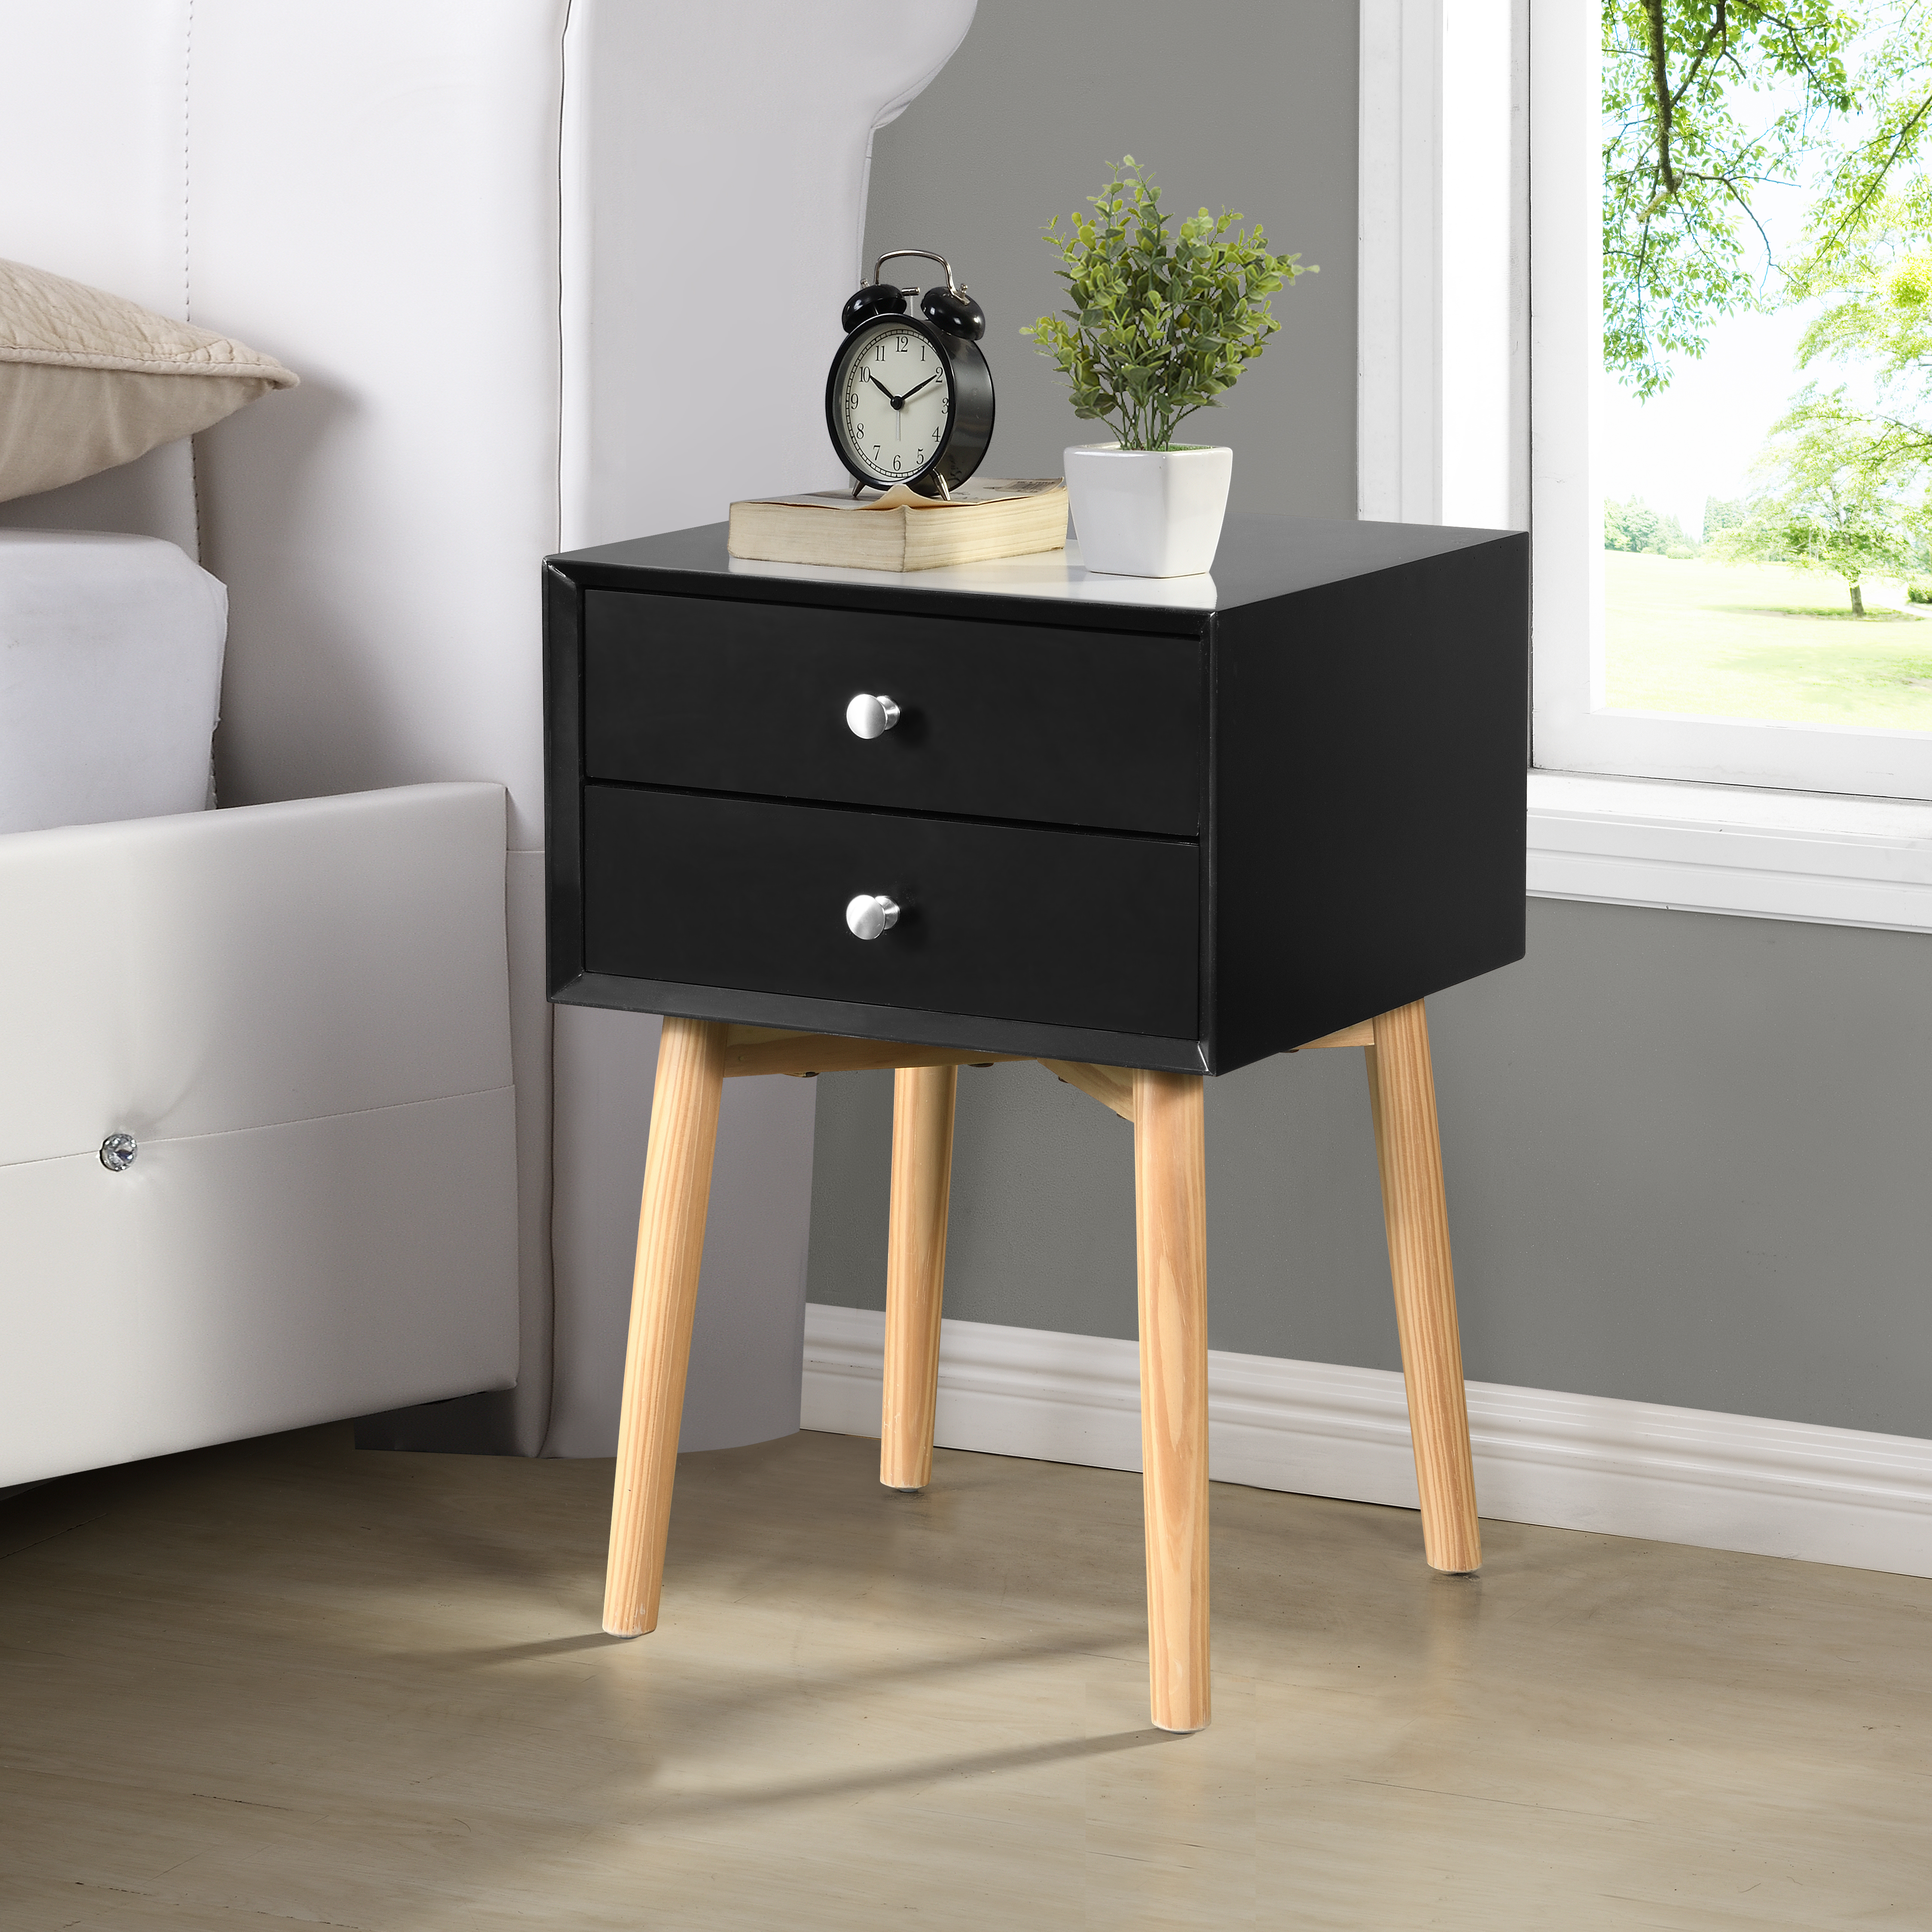 Side Table with 2 Drawer and Rubber Wood Legs, Mid-Century Modern Storage Cabinet for Bedroom Living Room Furniture, Black-Boyel Living